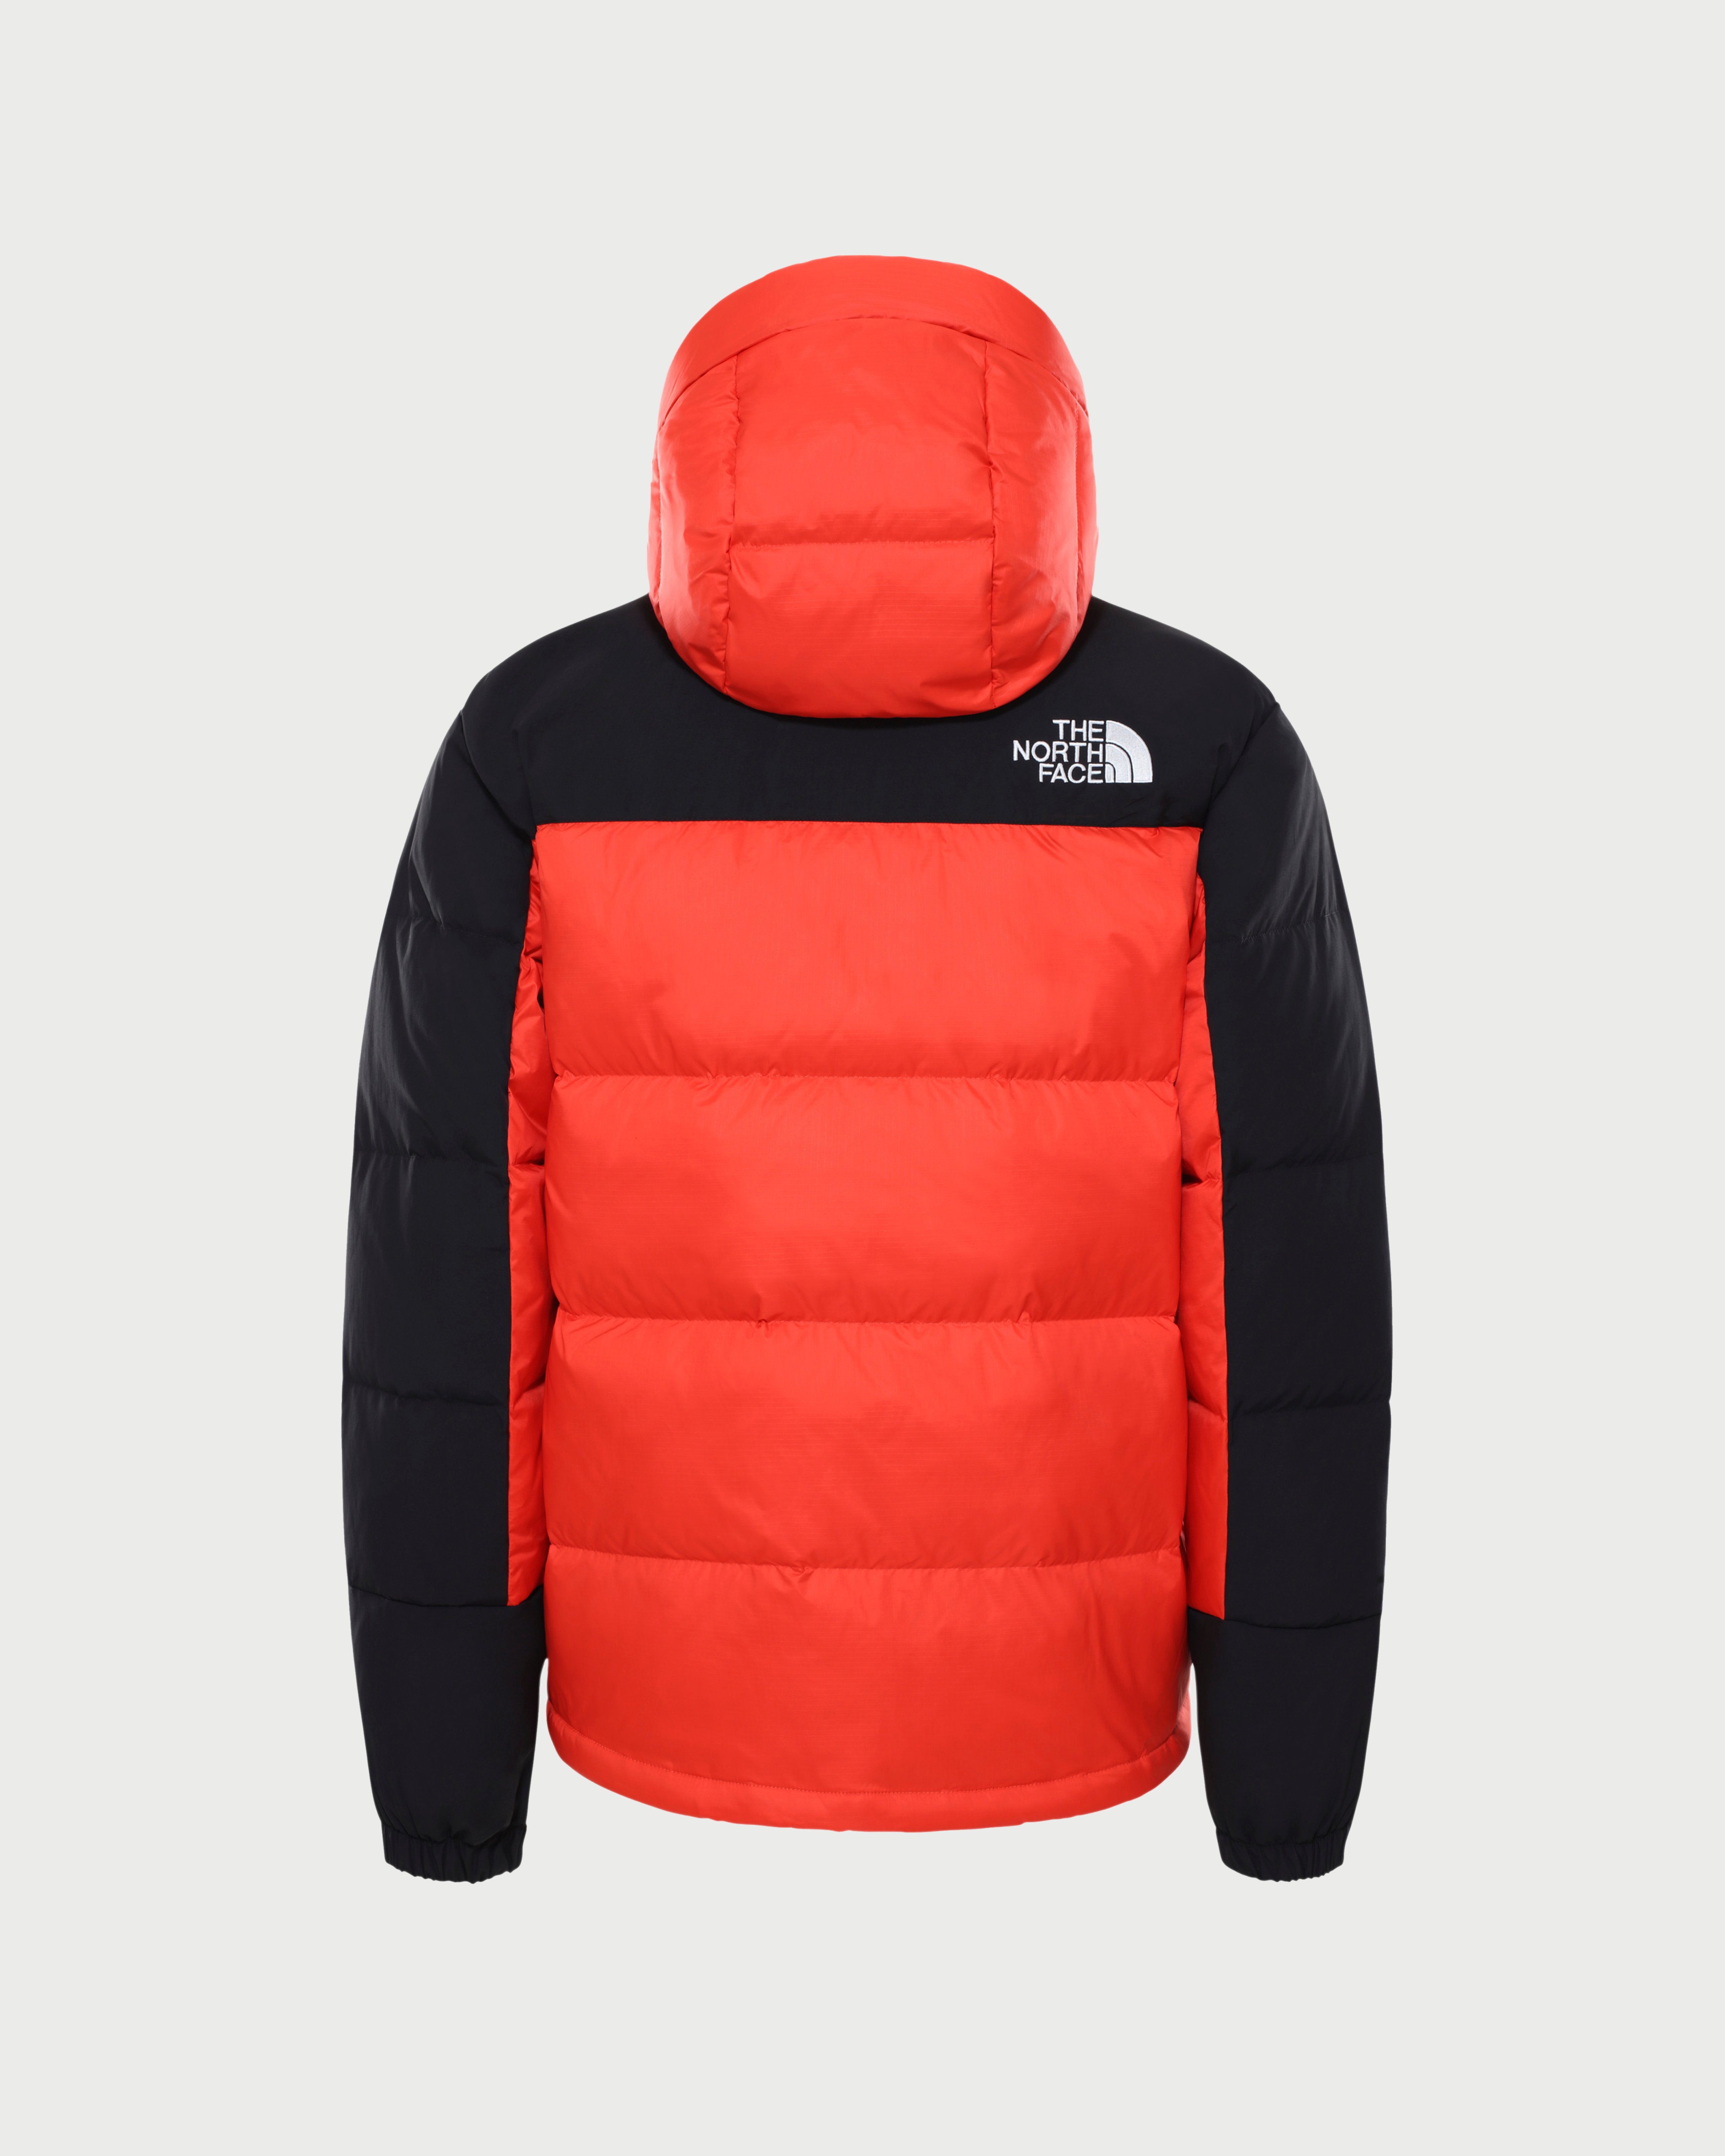 The North Face - Himalayan Down Jacket Peak Flare Unisex - Clothing - Red - Image 2